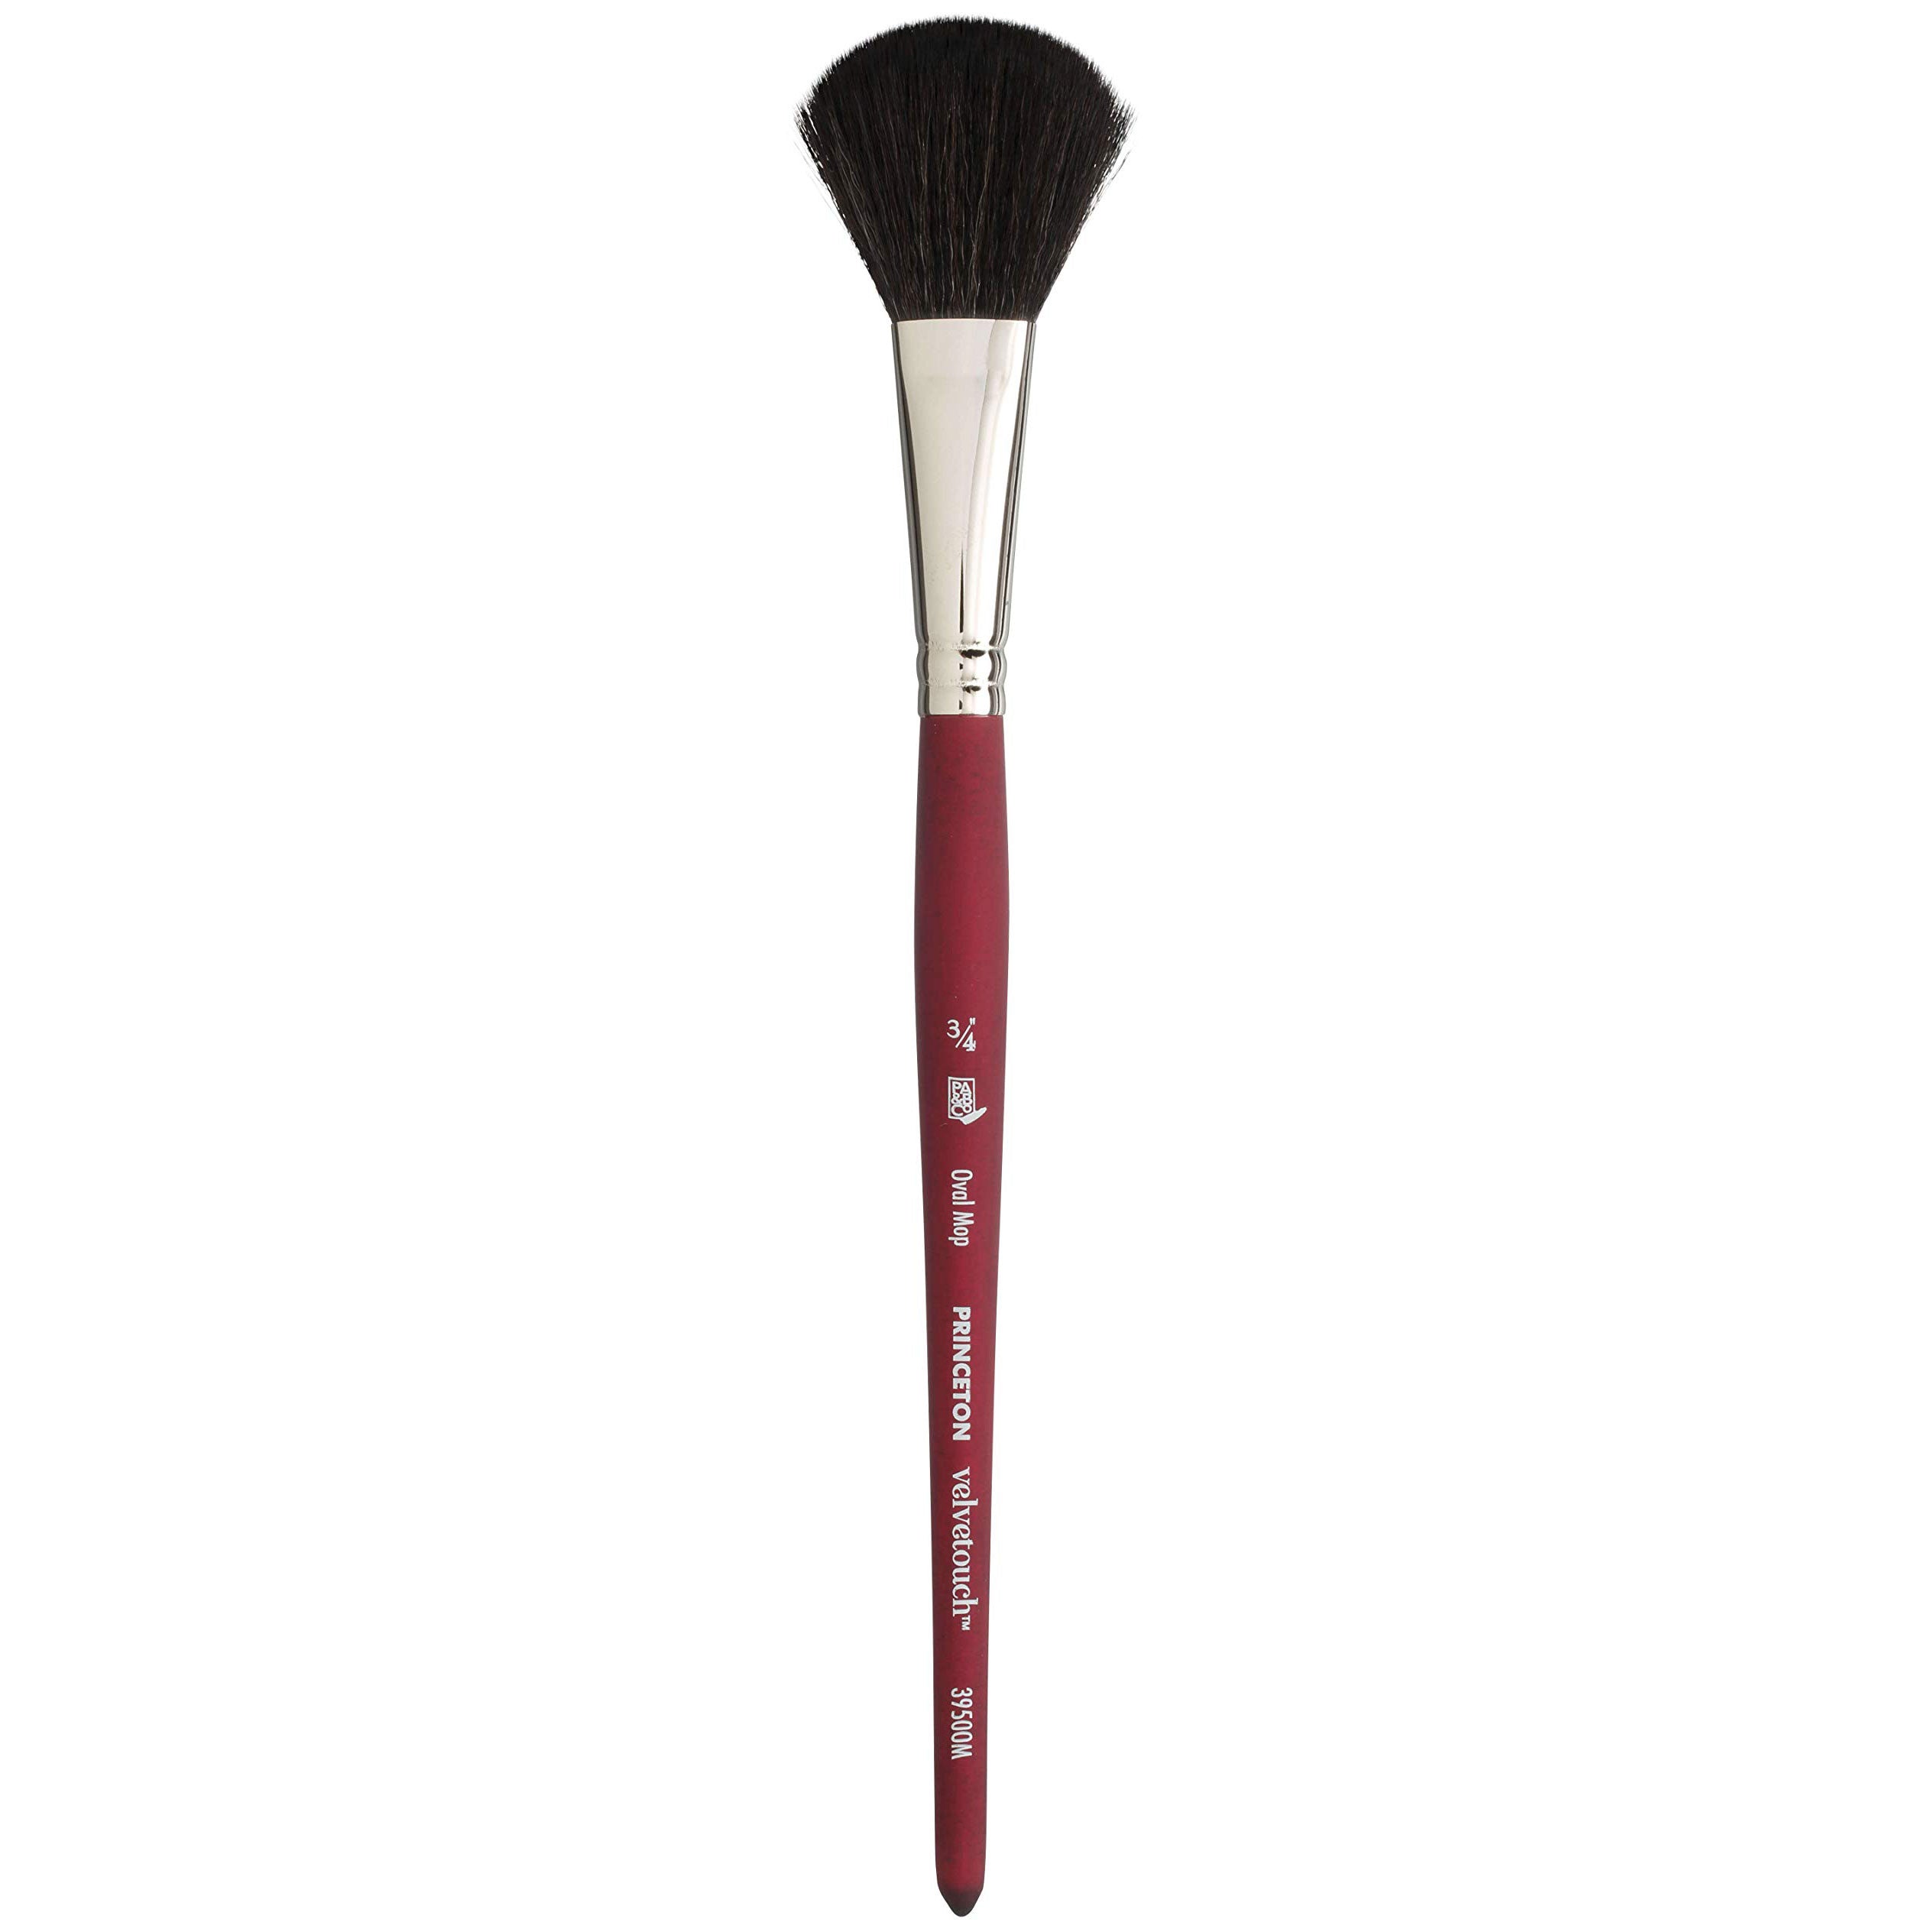 Princeton Velvetouch Liner Brush, Long Handle, Size 2 - Professional Artist  Brushes for Mixed Media, Acrylic, Oil Red